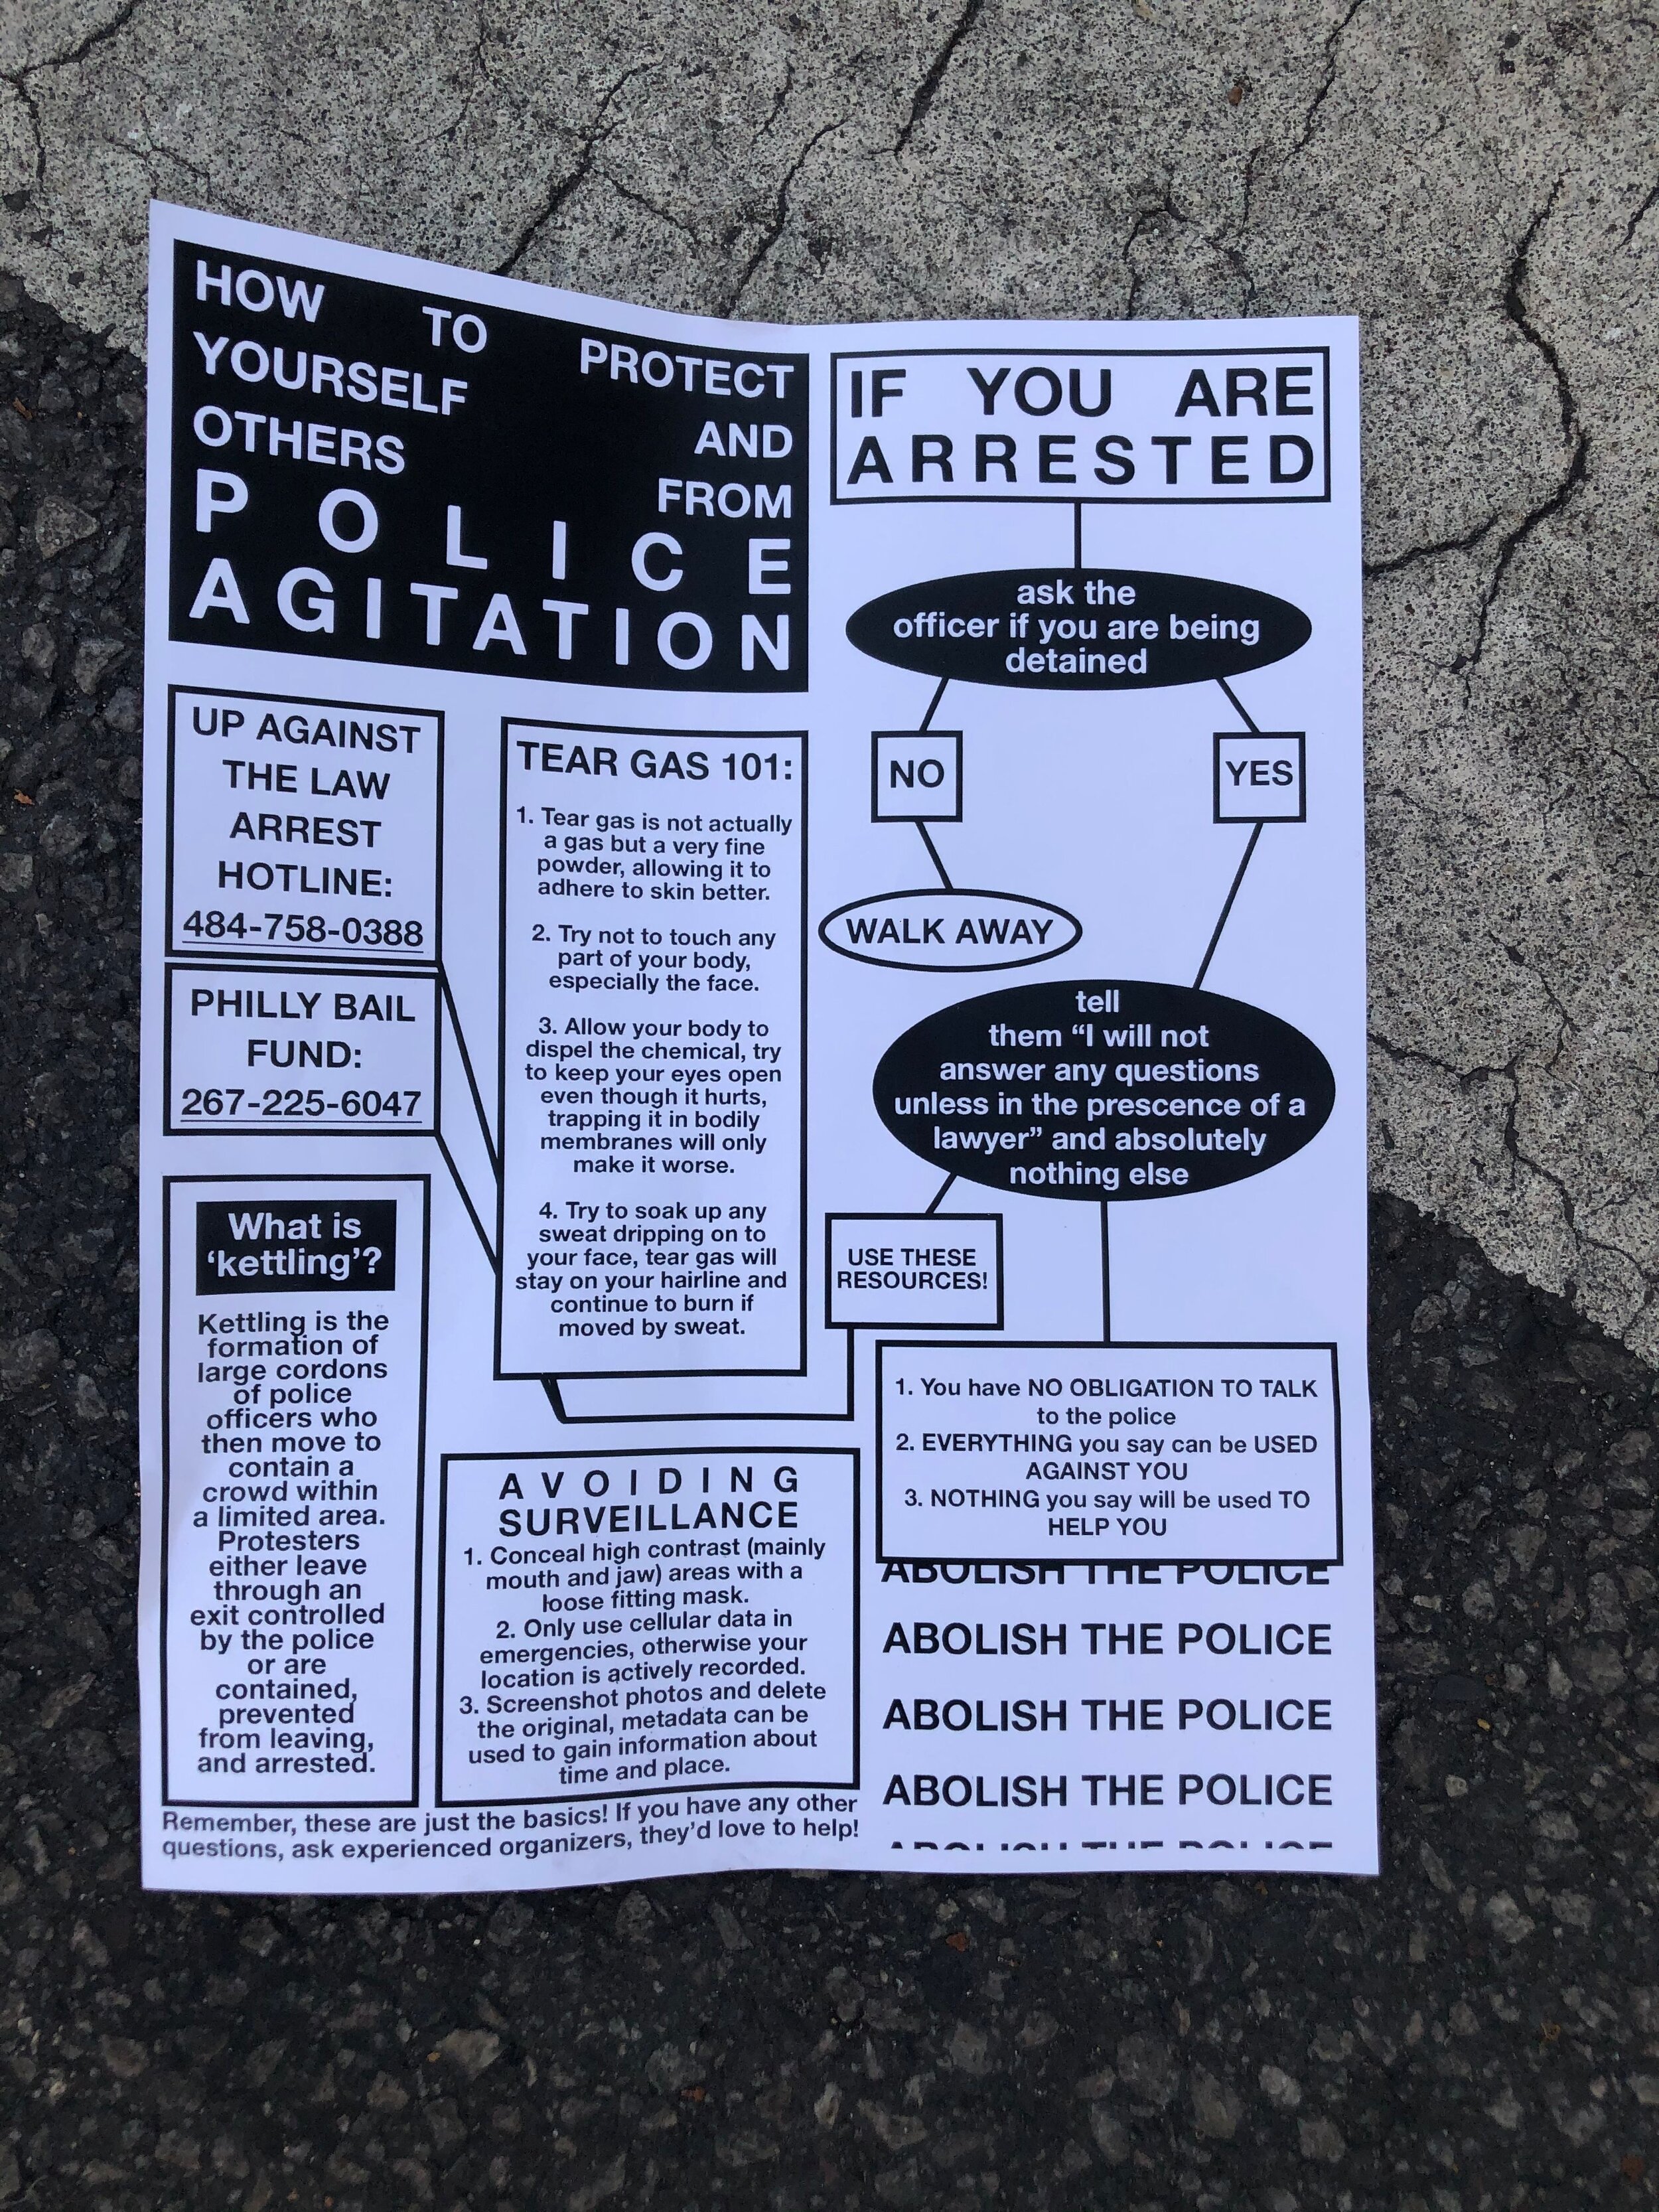 A flyer circulated during protests in Philadelphia.